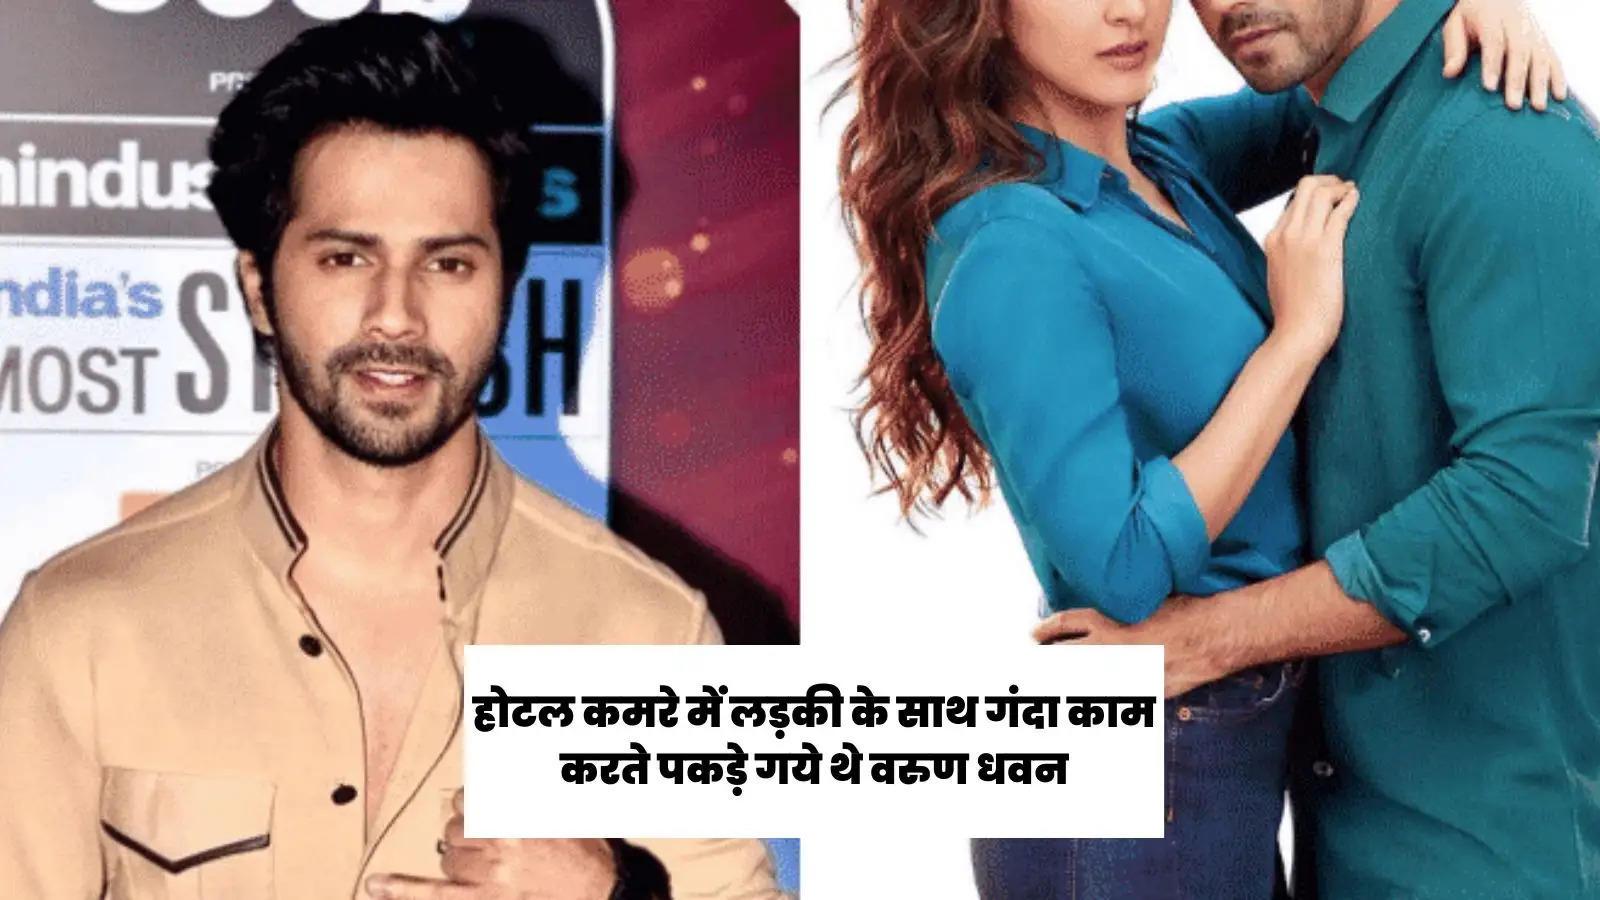 varun-dhawan-was-caught-with-the-girl-his-elder-brother-had-hit-6-slaps